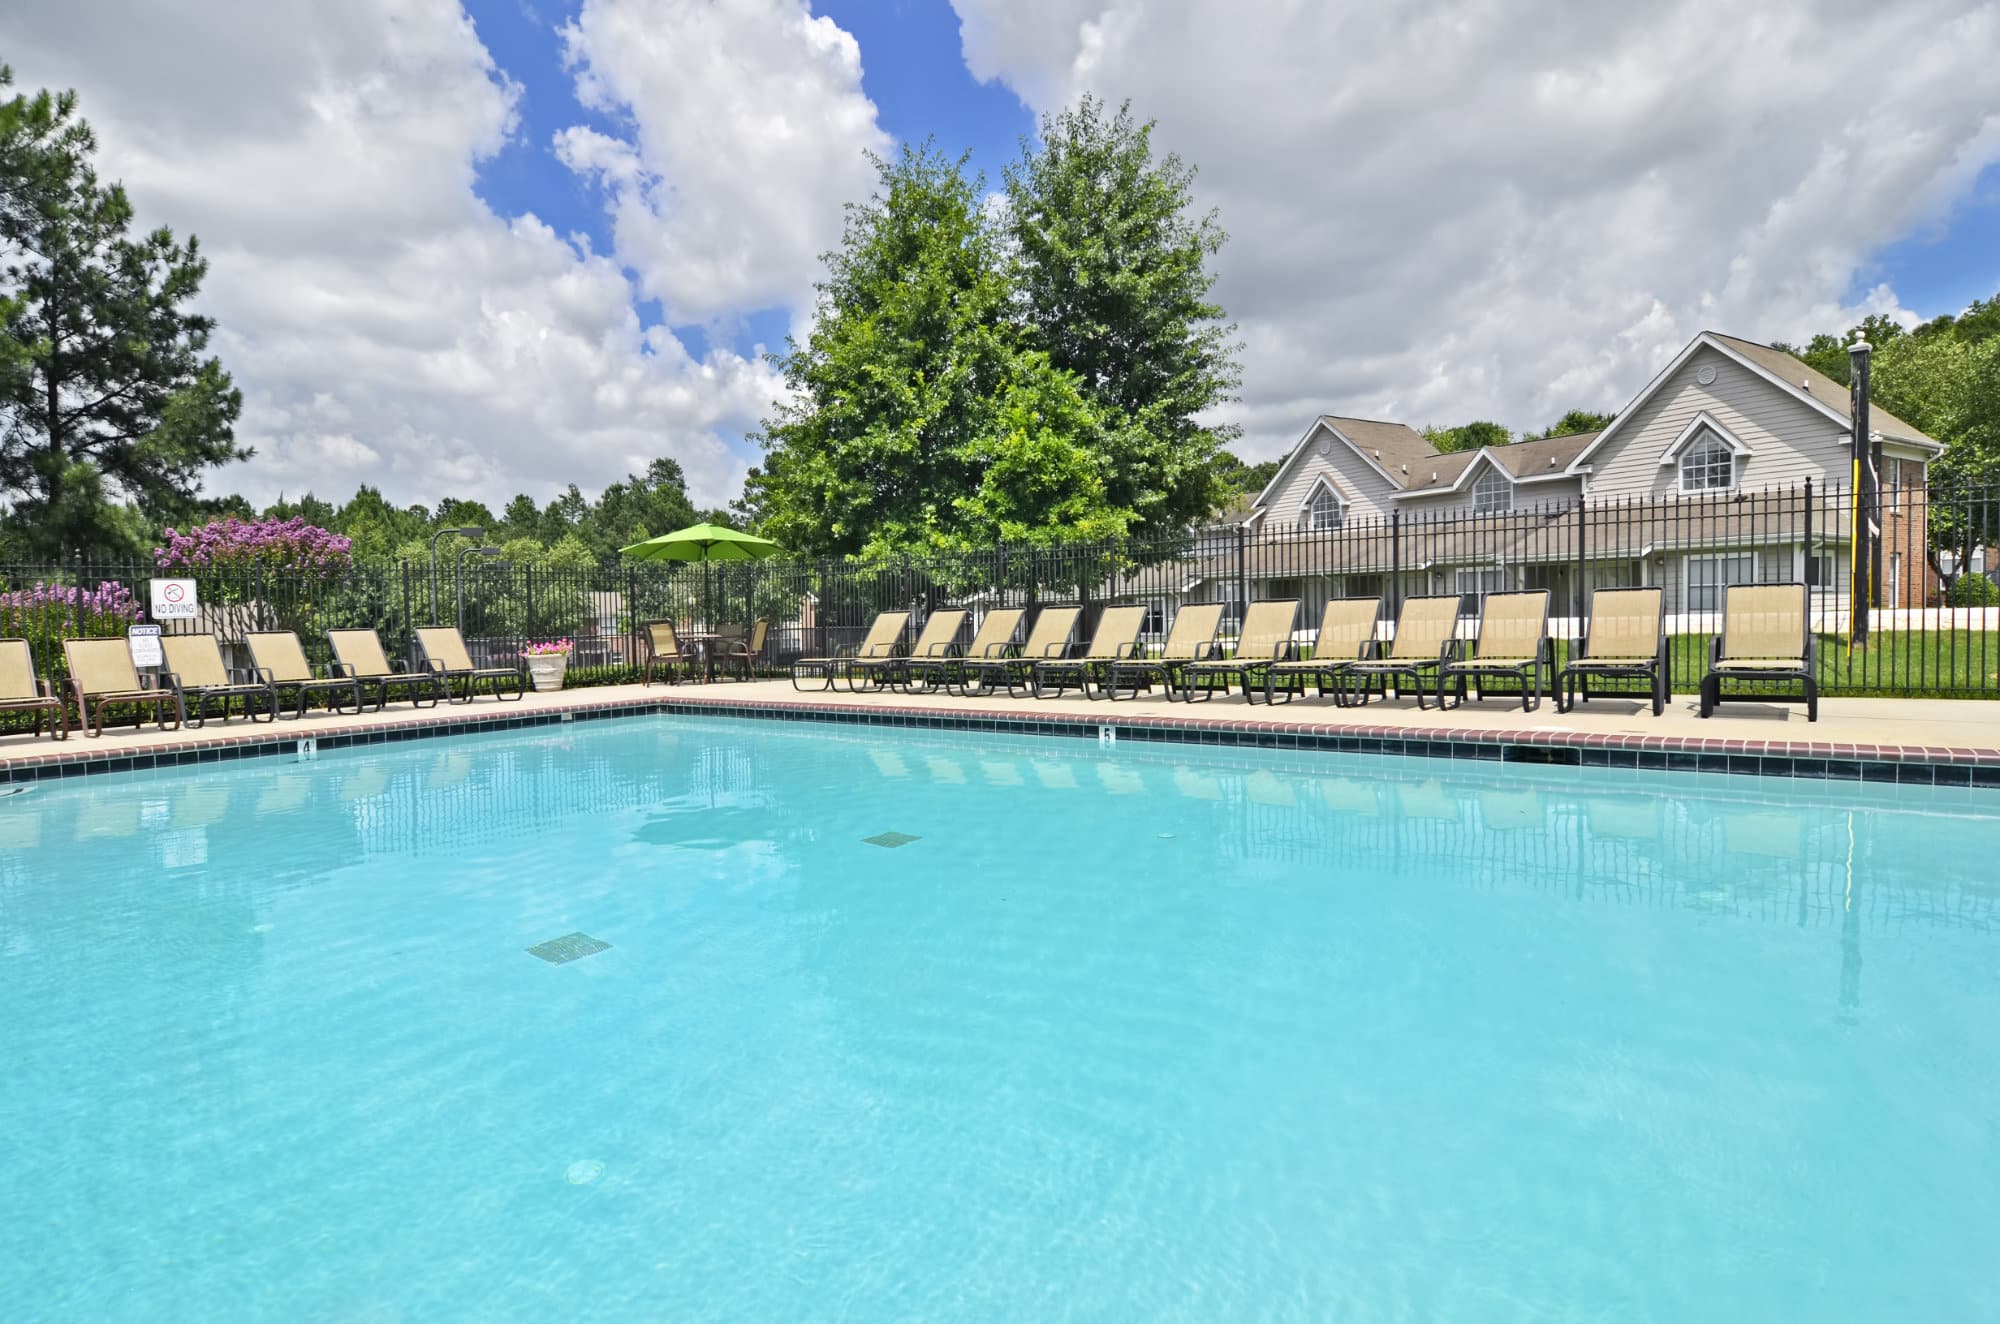 river-club-athens-the-townhomes-at-river-club-off-campus-apartments-near-the-university-of-georgia-swimmin-pool-lounge-chairs